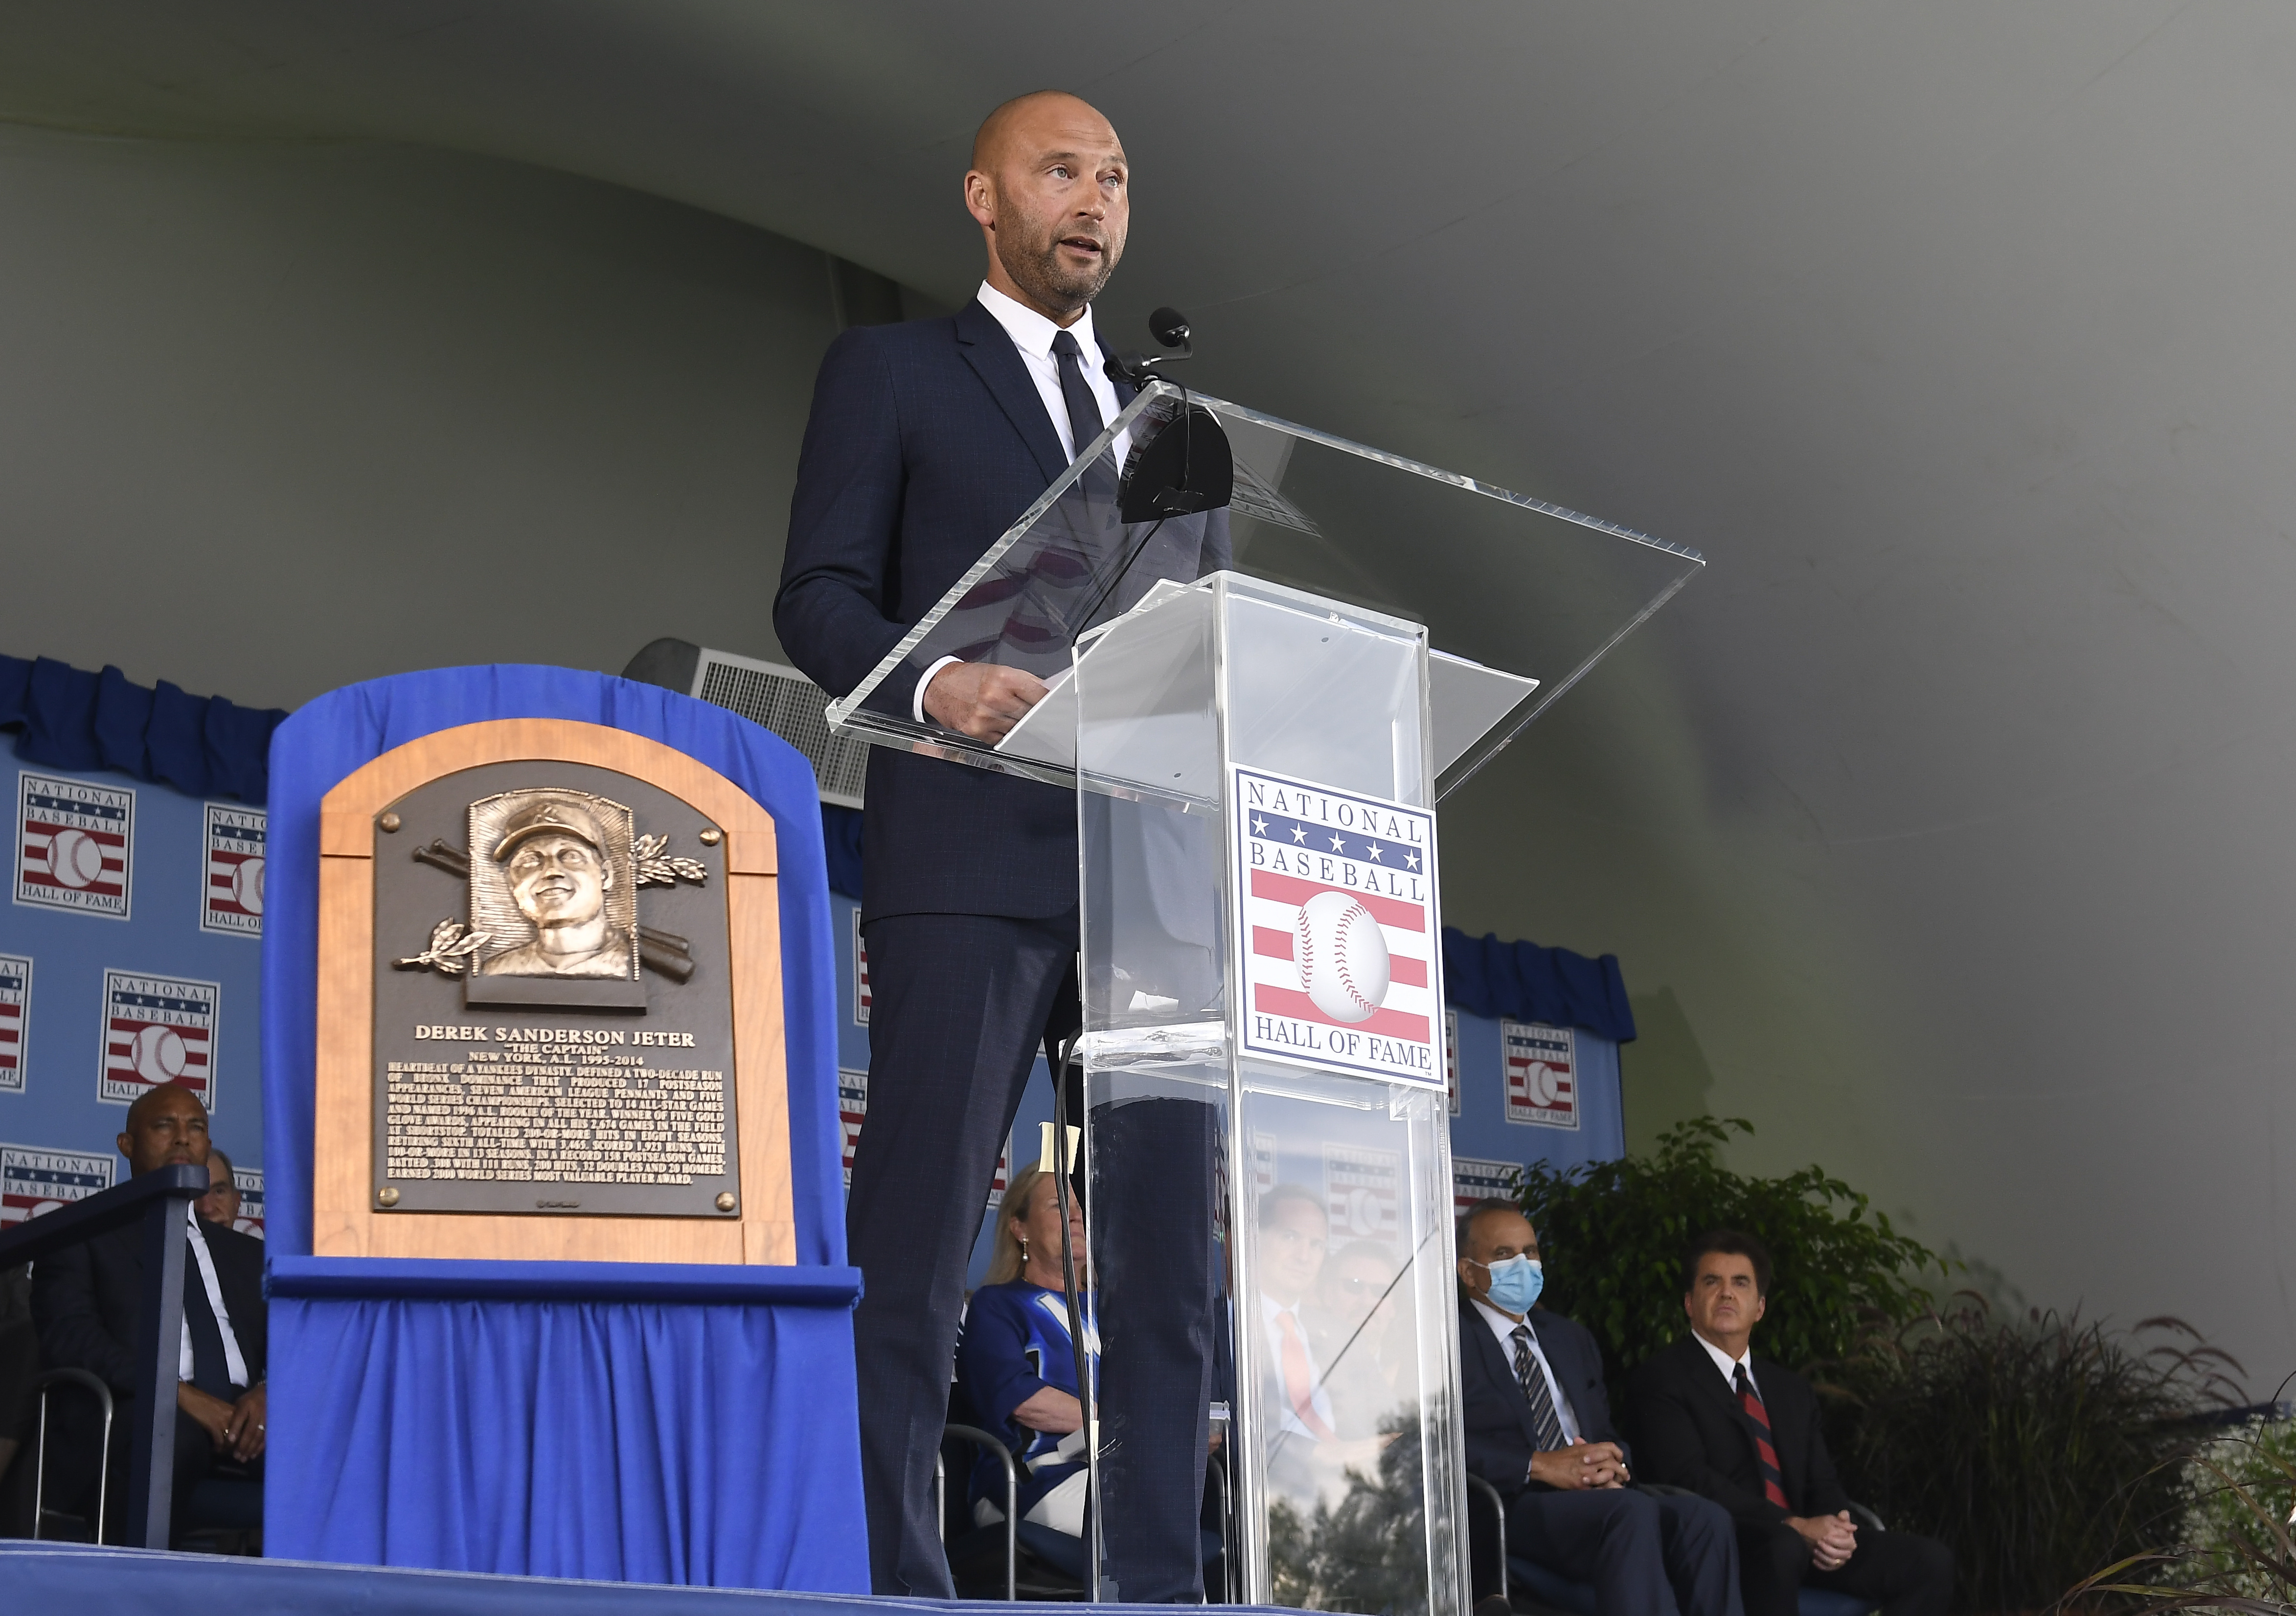 Derek Jeter's Career Filled with Hall of Fame Moments - Cooperstown Cred